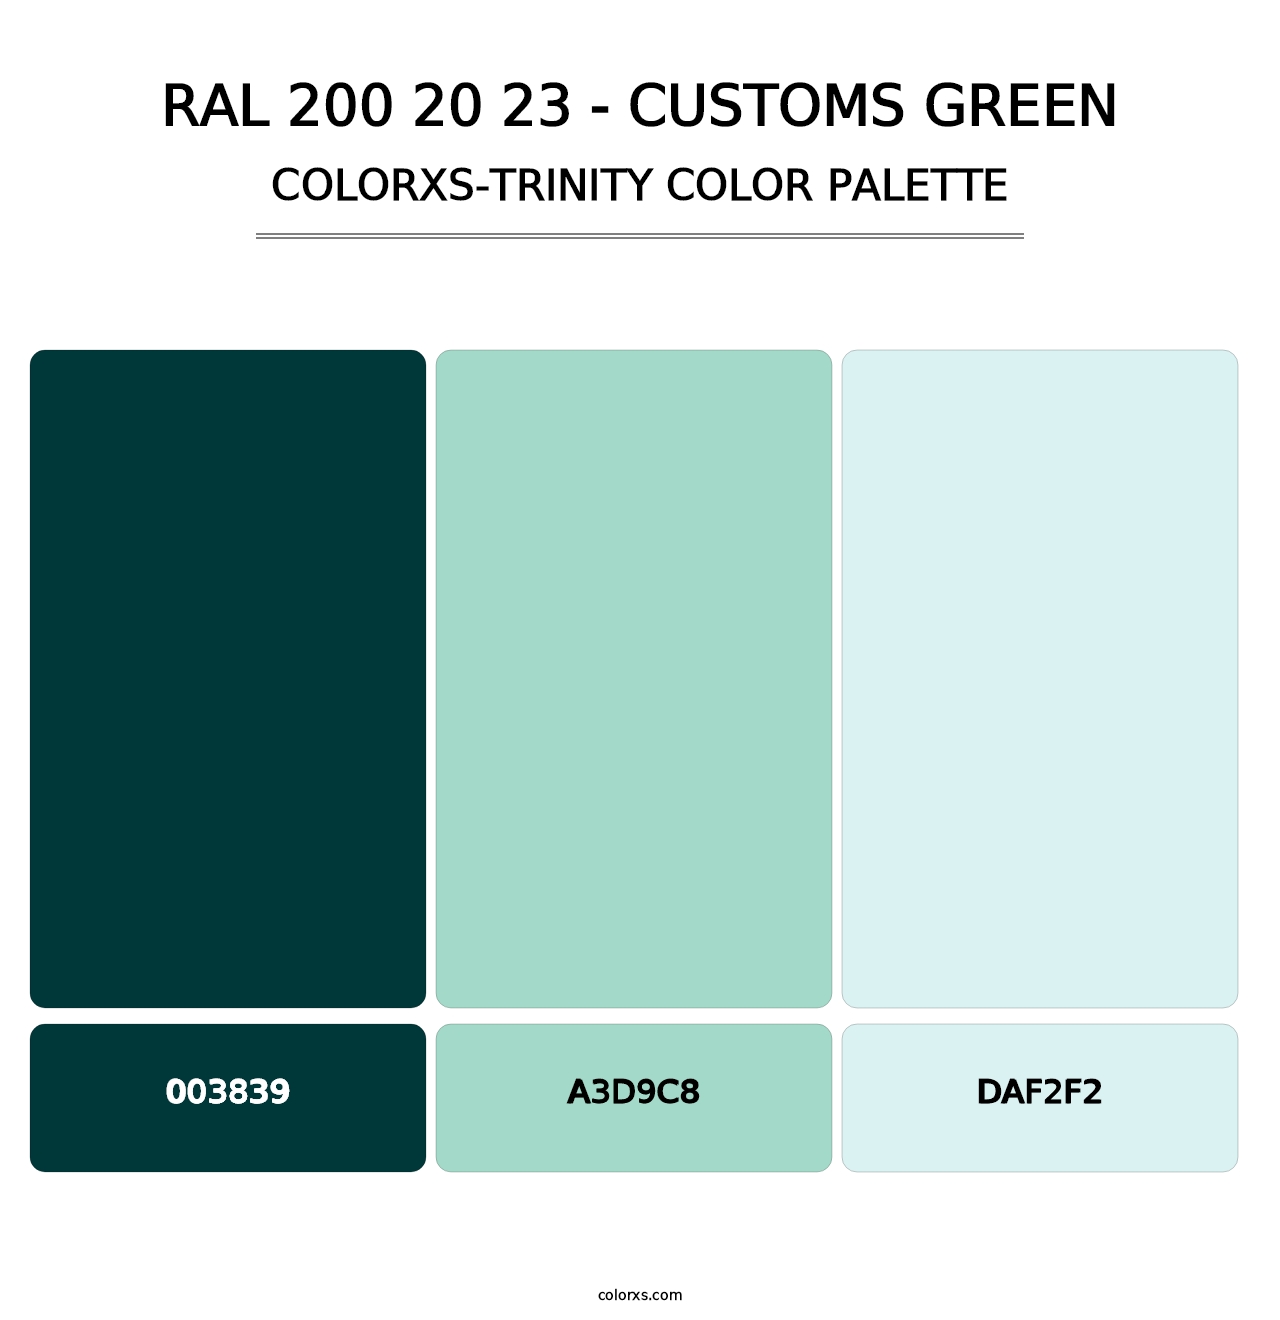 RAL 200 20 23 - Customs Green - Colorxs Trinity Palette